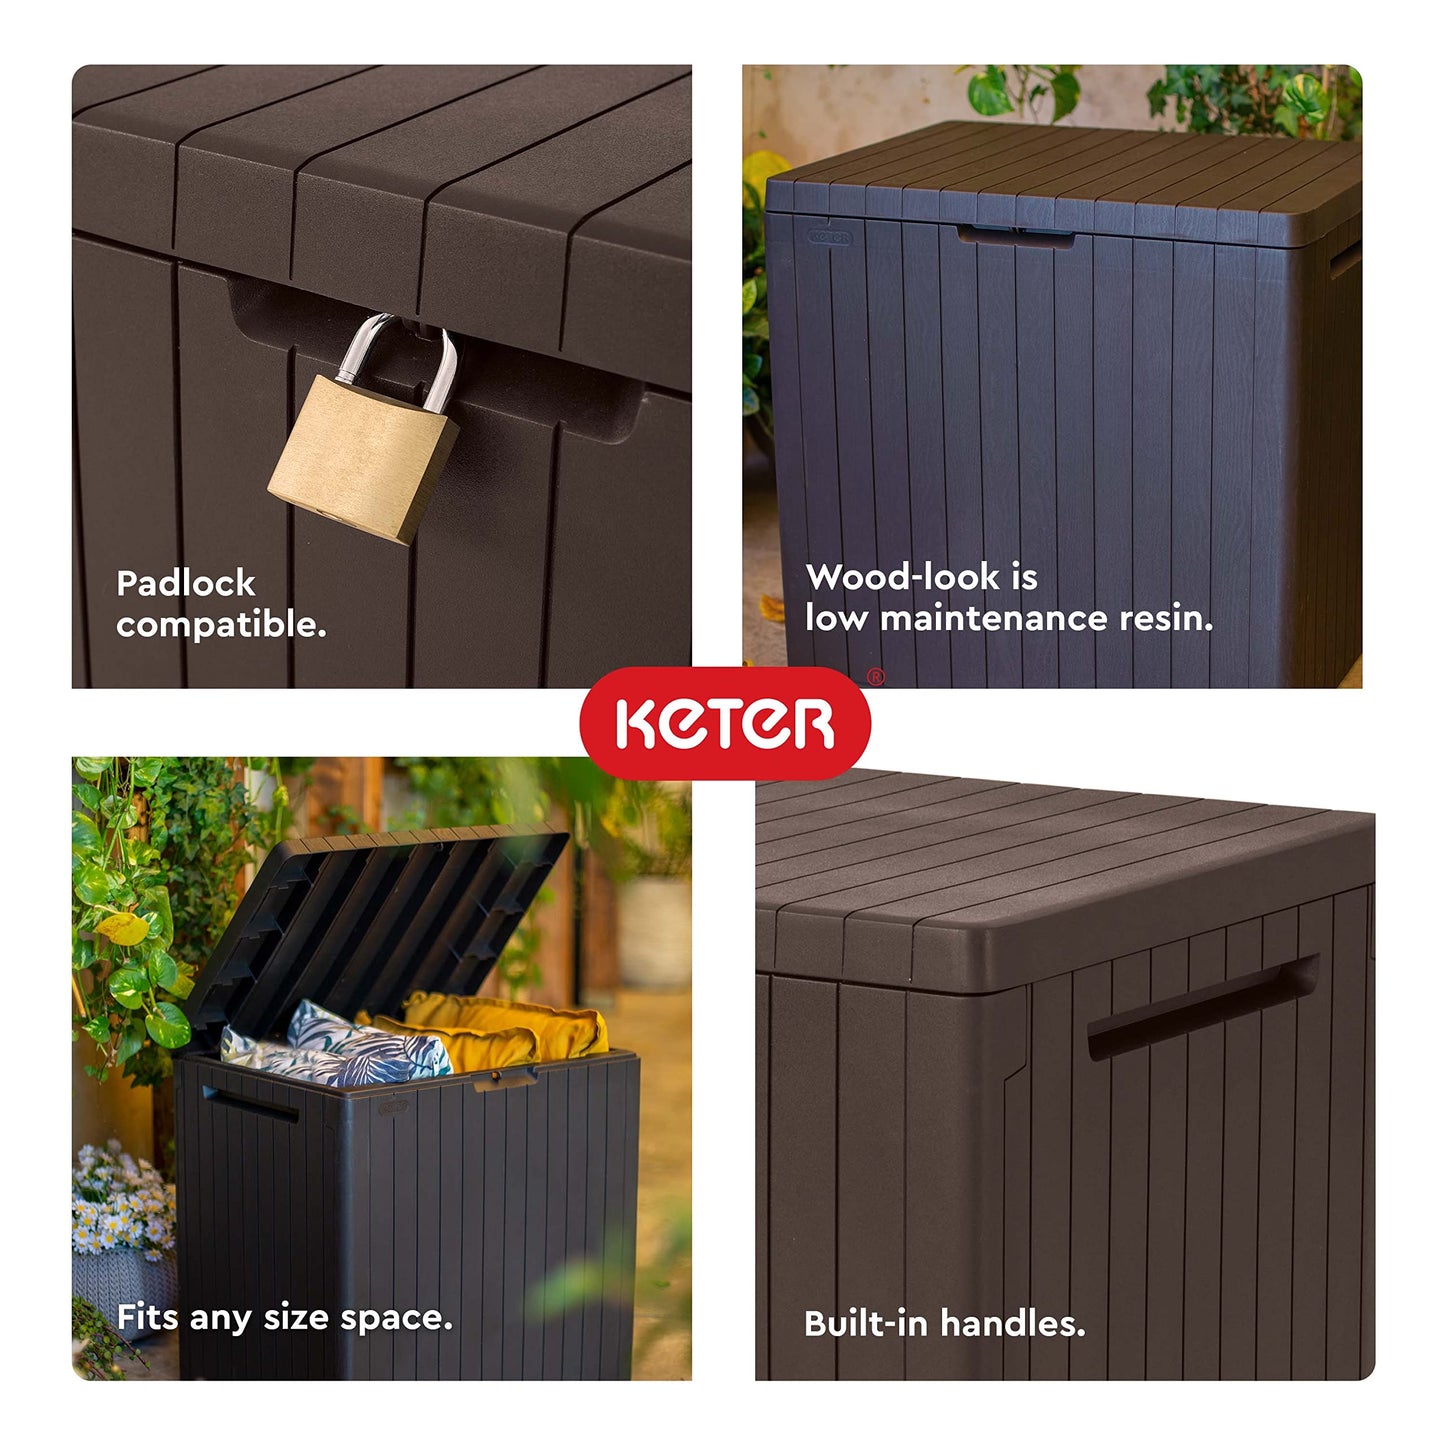 Keter City 30 Gallon Resin Deck Box for Patio Furniture, Pool Accessories, and Storage for Outdoor Toys, Grey